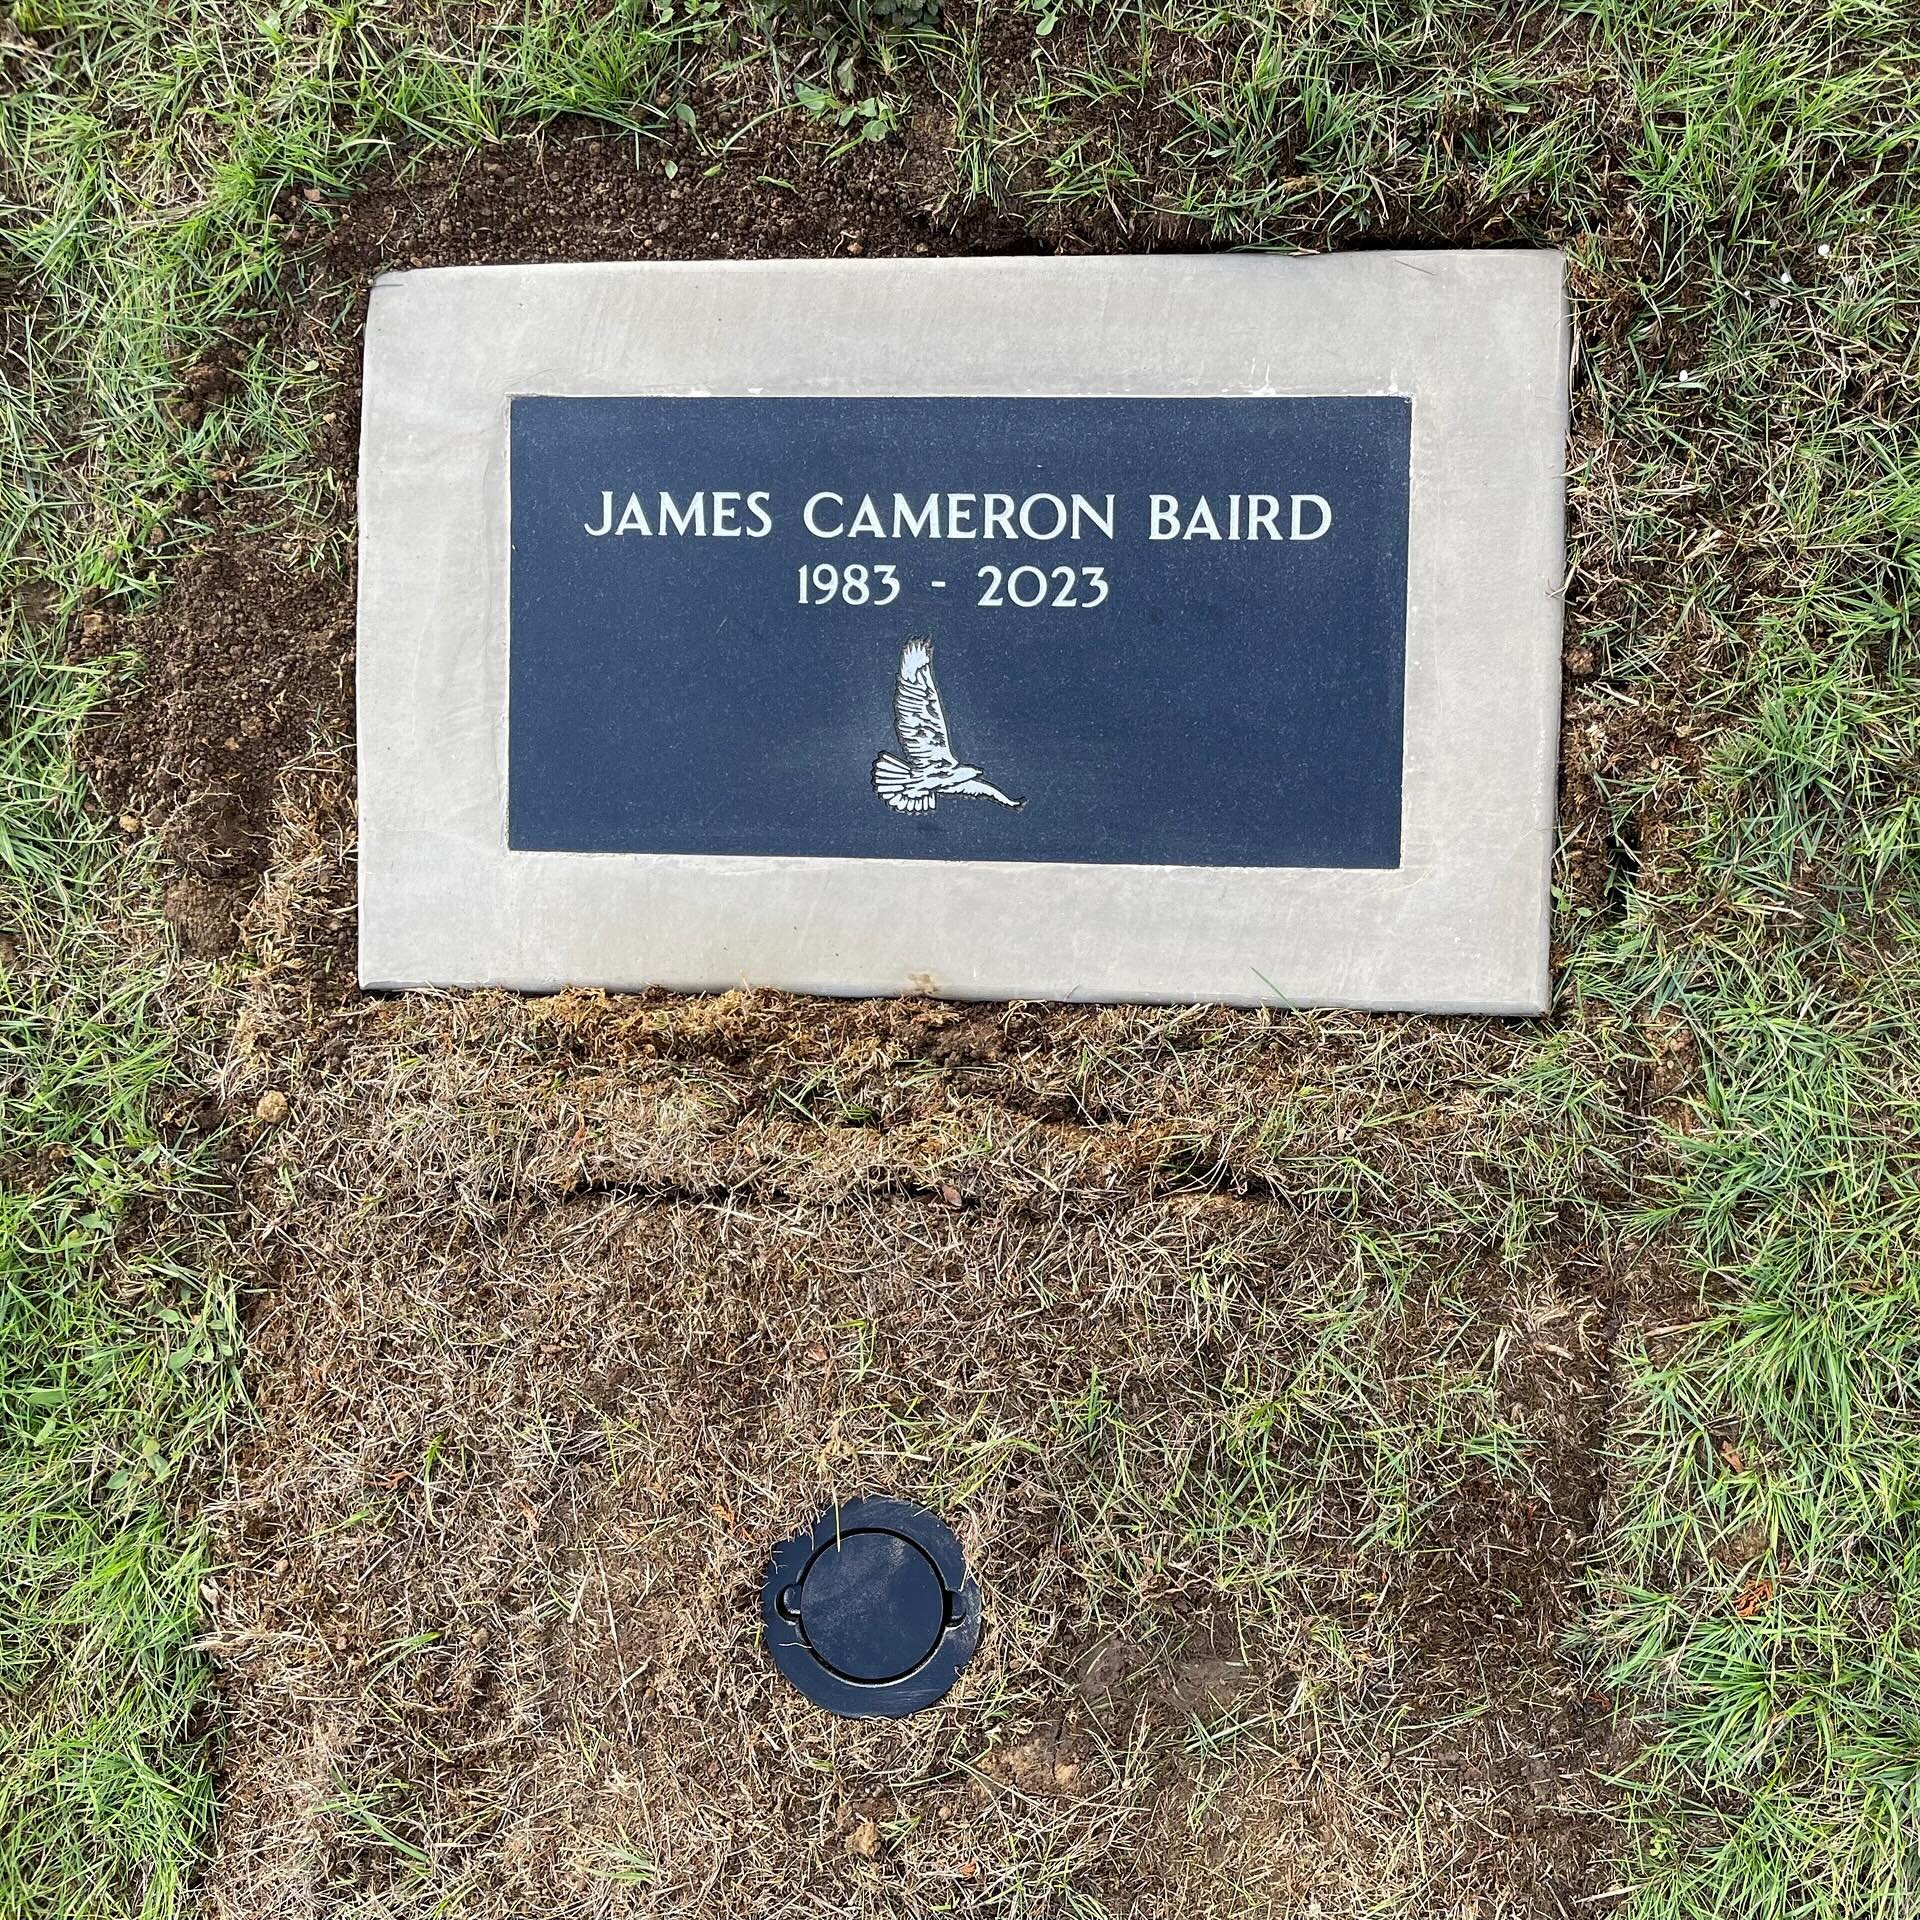 Cameron is buried at a beautiful little cemetery, just a couple minutes from our house, surrounded by pastures and a view of the river.
⠀⠀⠀⠀⠀⠀⠀⠀⠀
The round thing on his grave is a flower holder that catches rain water.